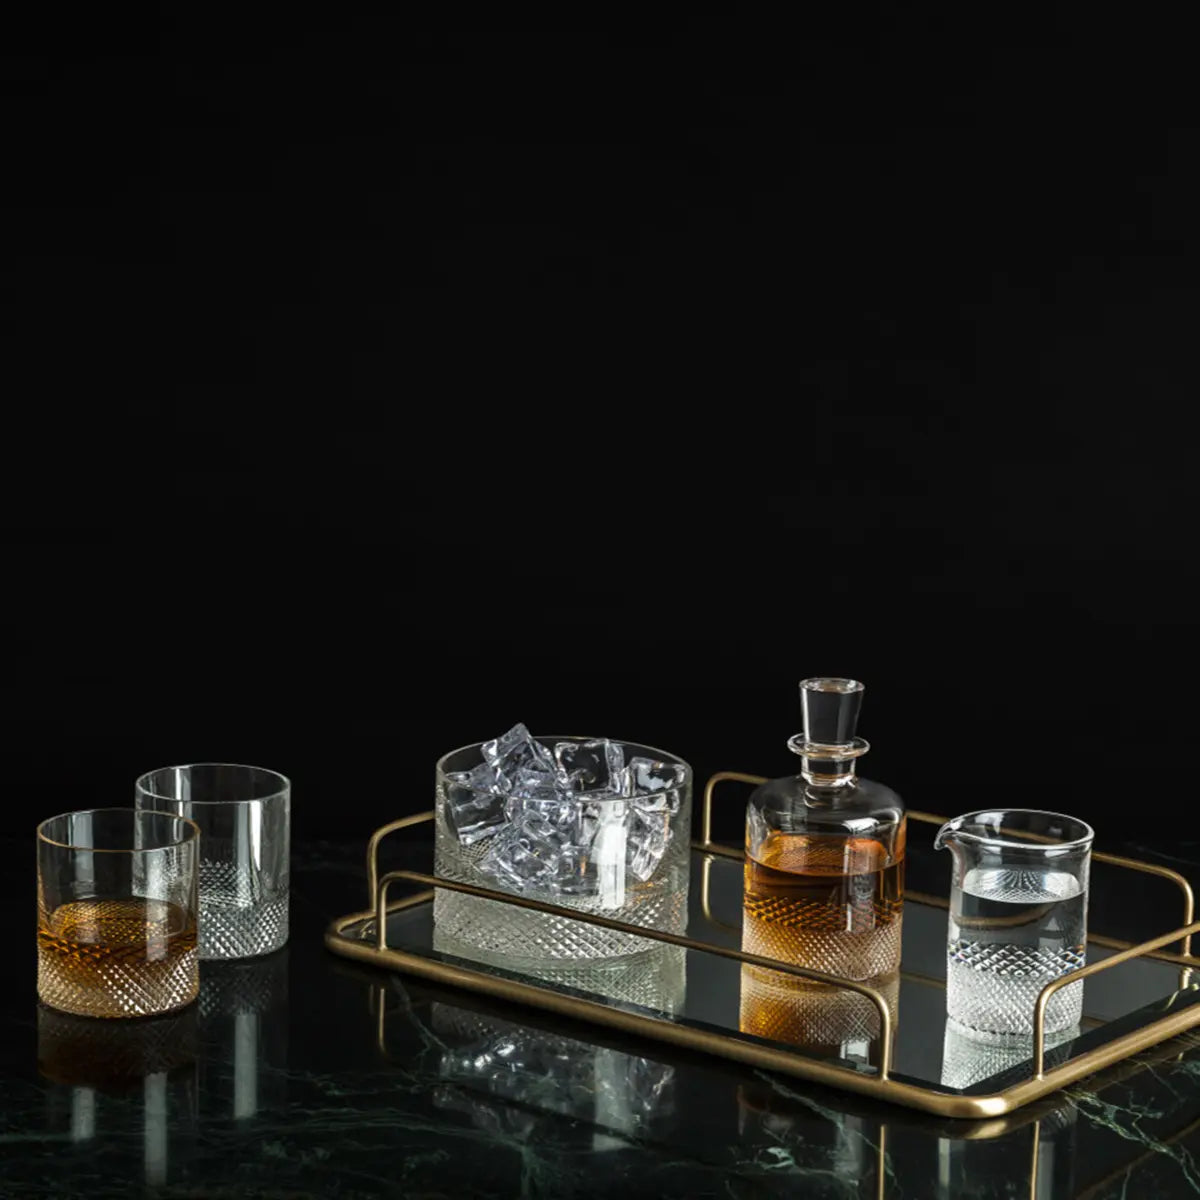 Richard Brendon Diamond Ice Bucket in a black room with a tray and other glassware